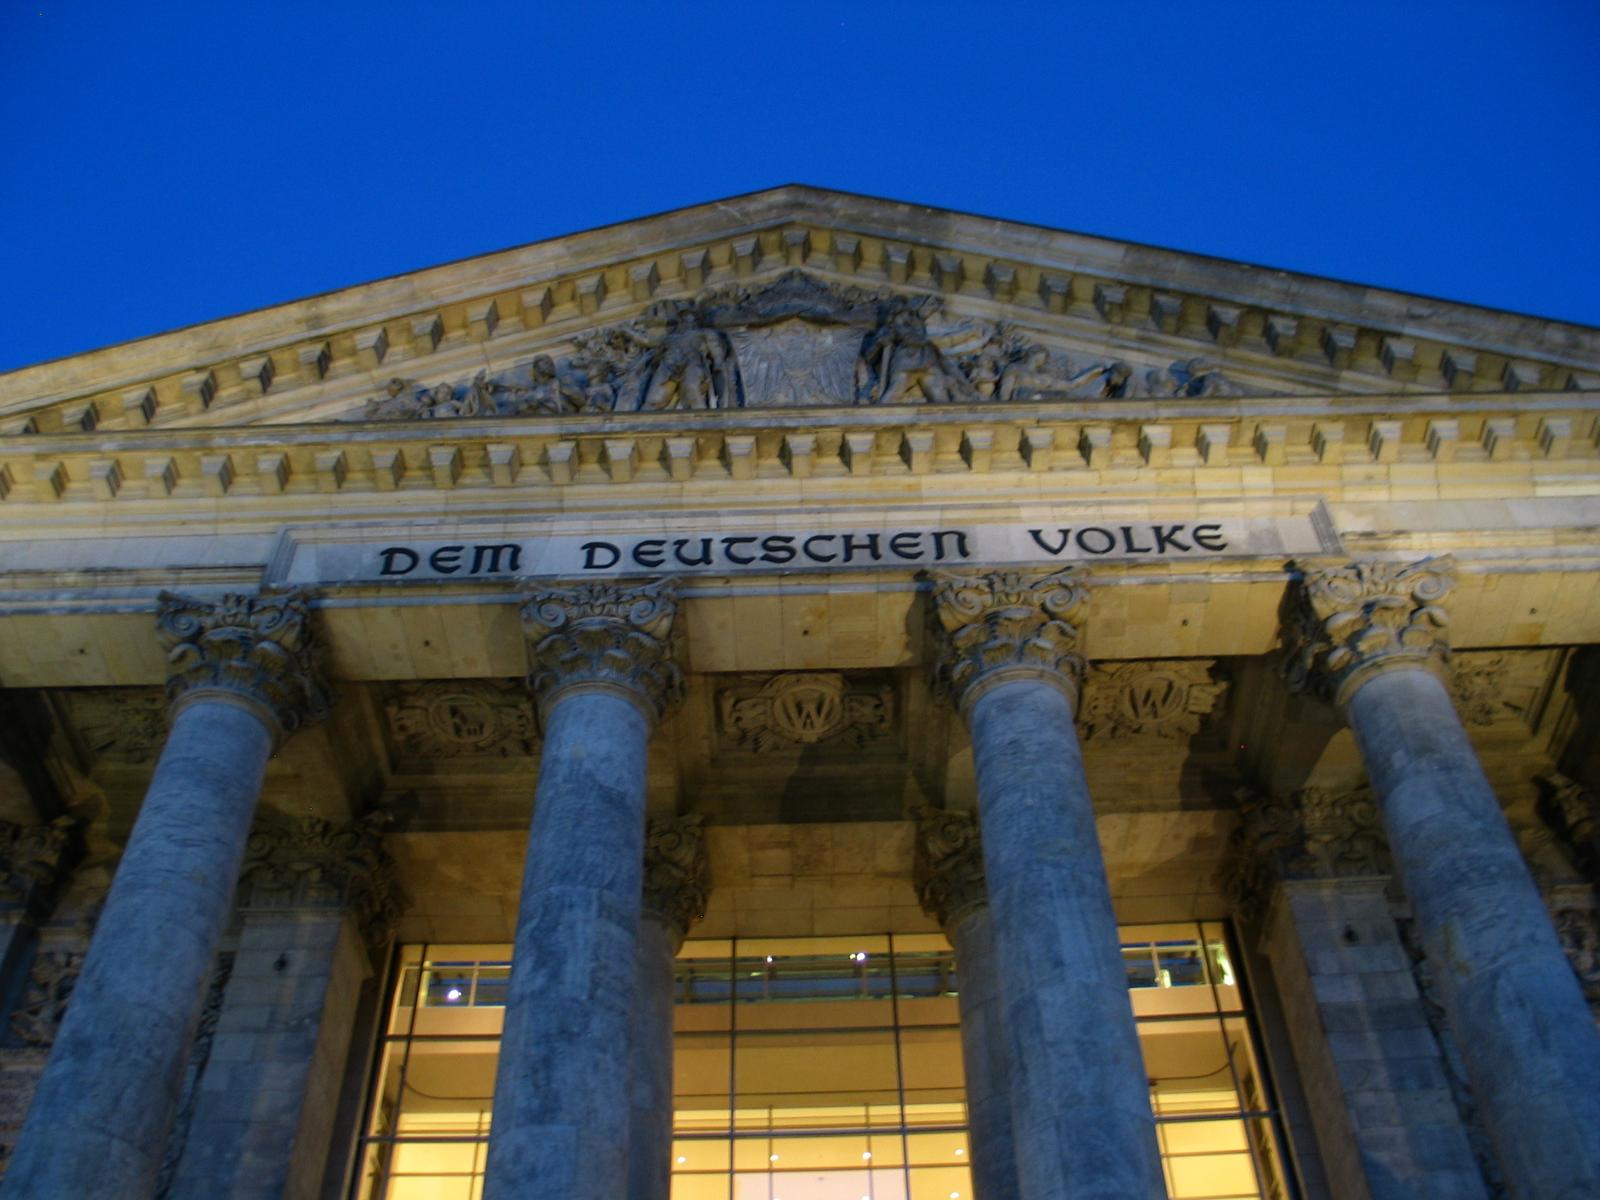 The Reichstag entrance